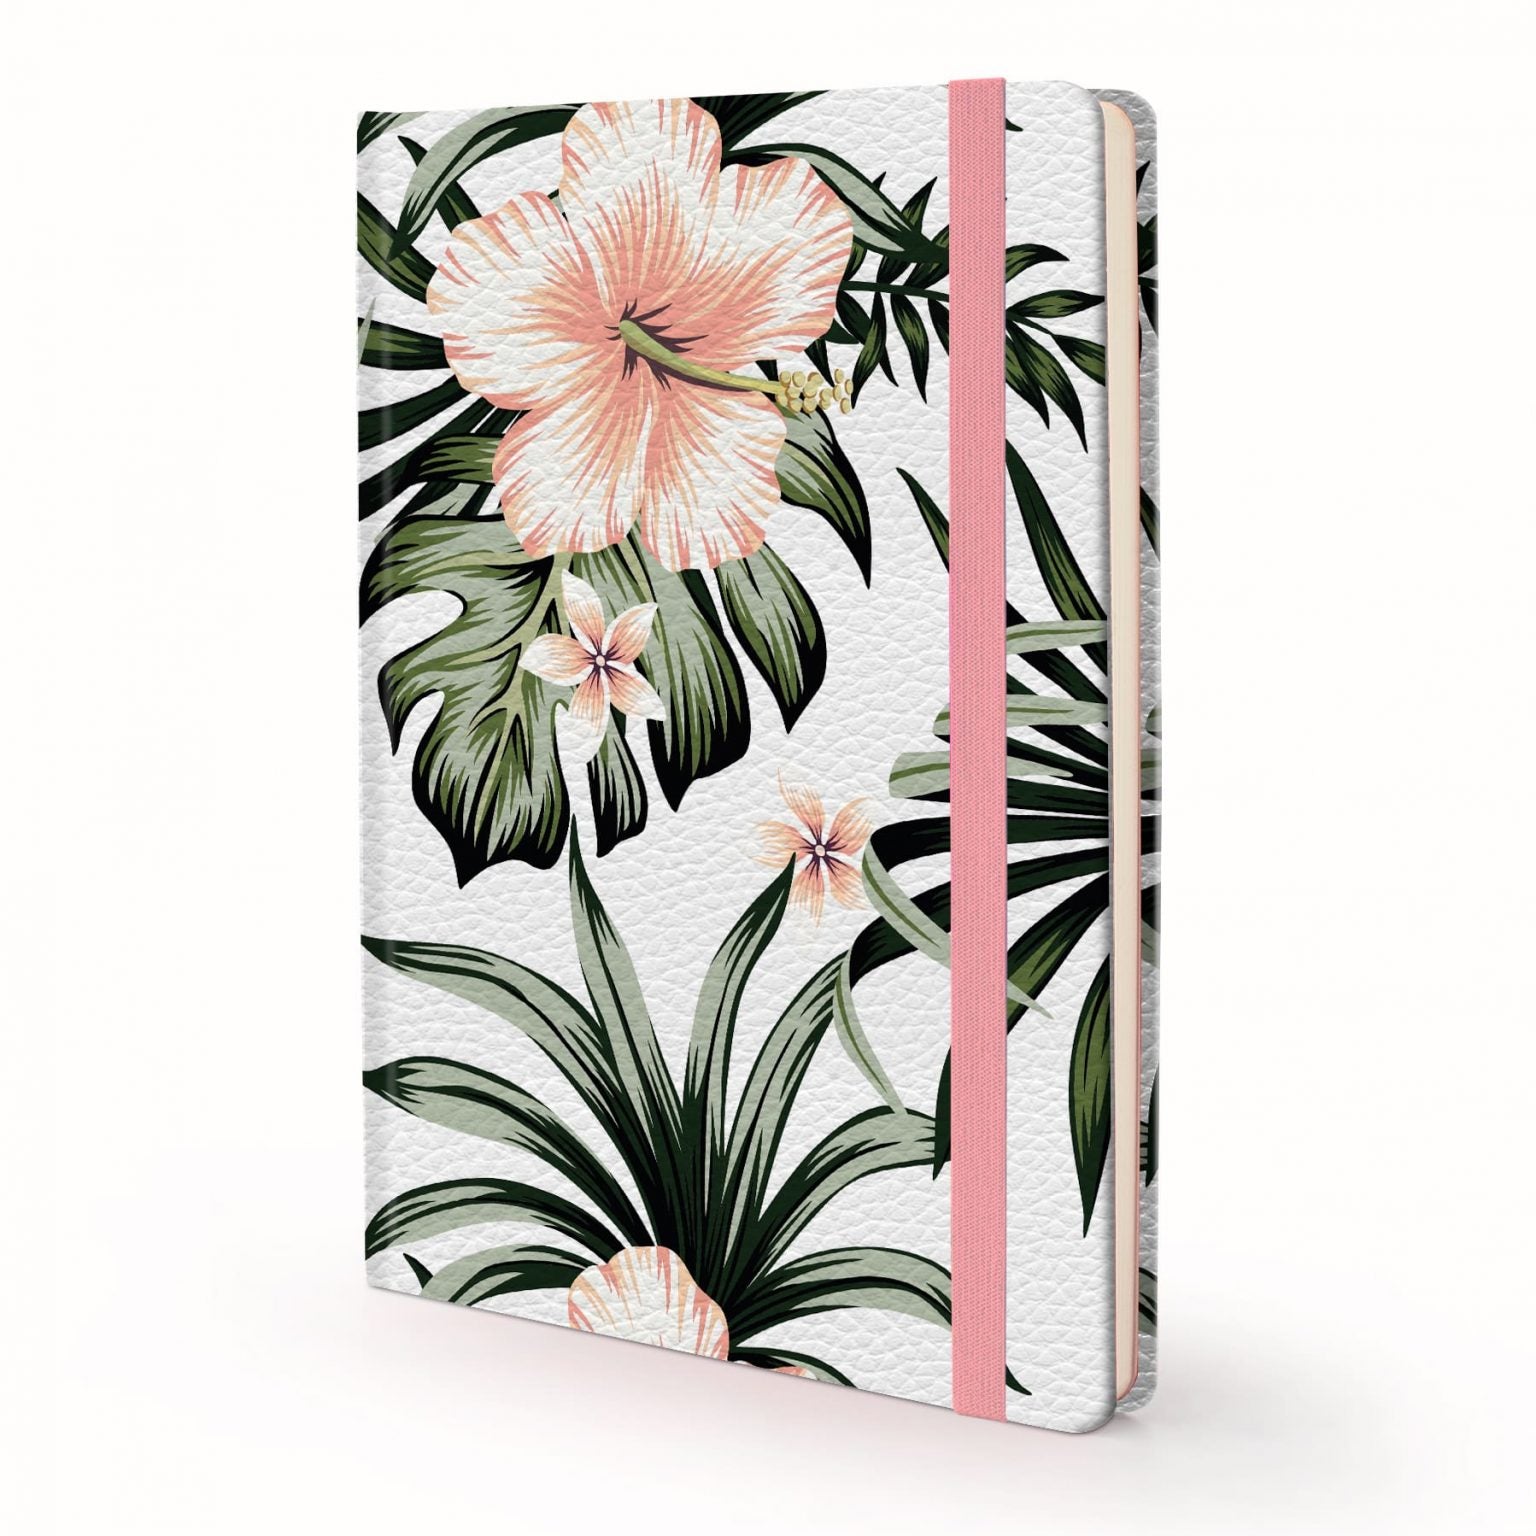 Image shows a Floral Hibiscus journal